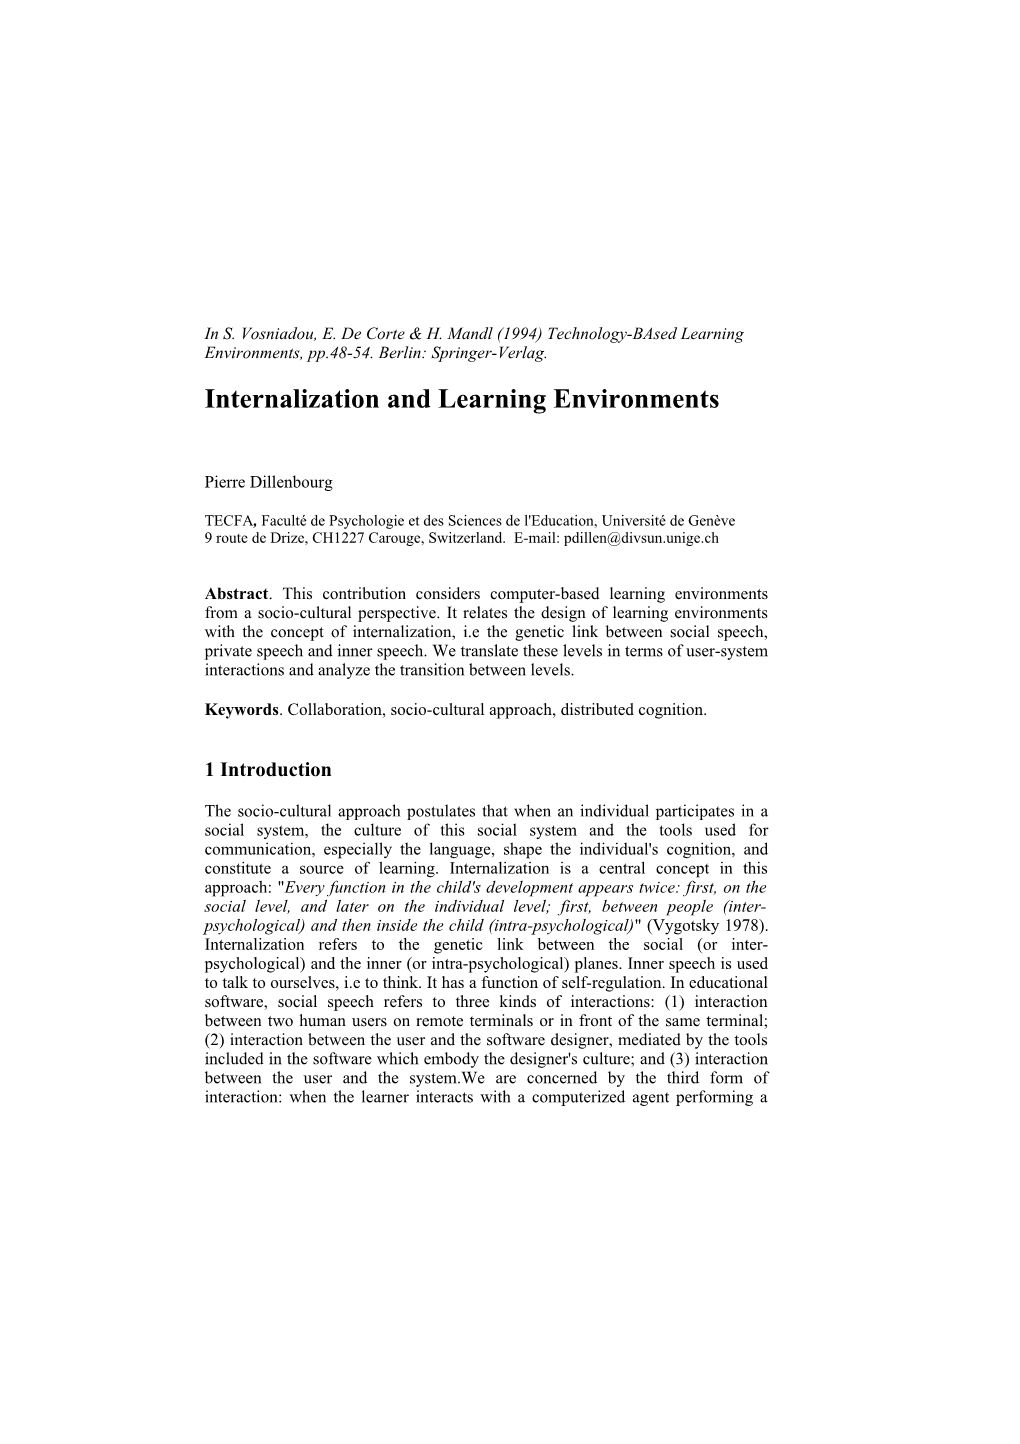 Internalization and Learning Environments